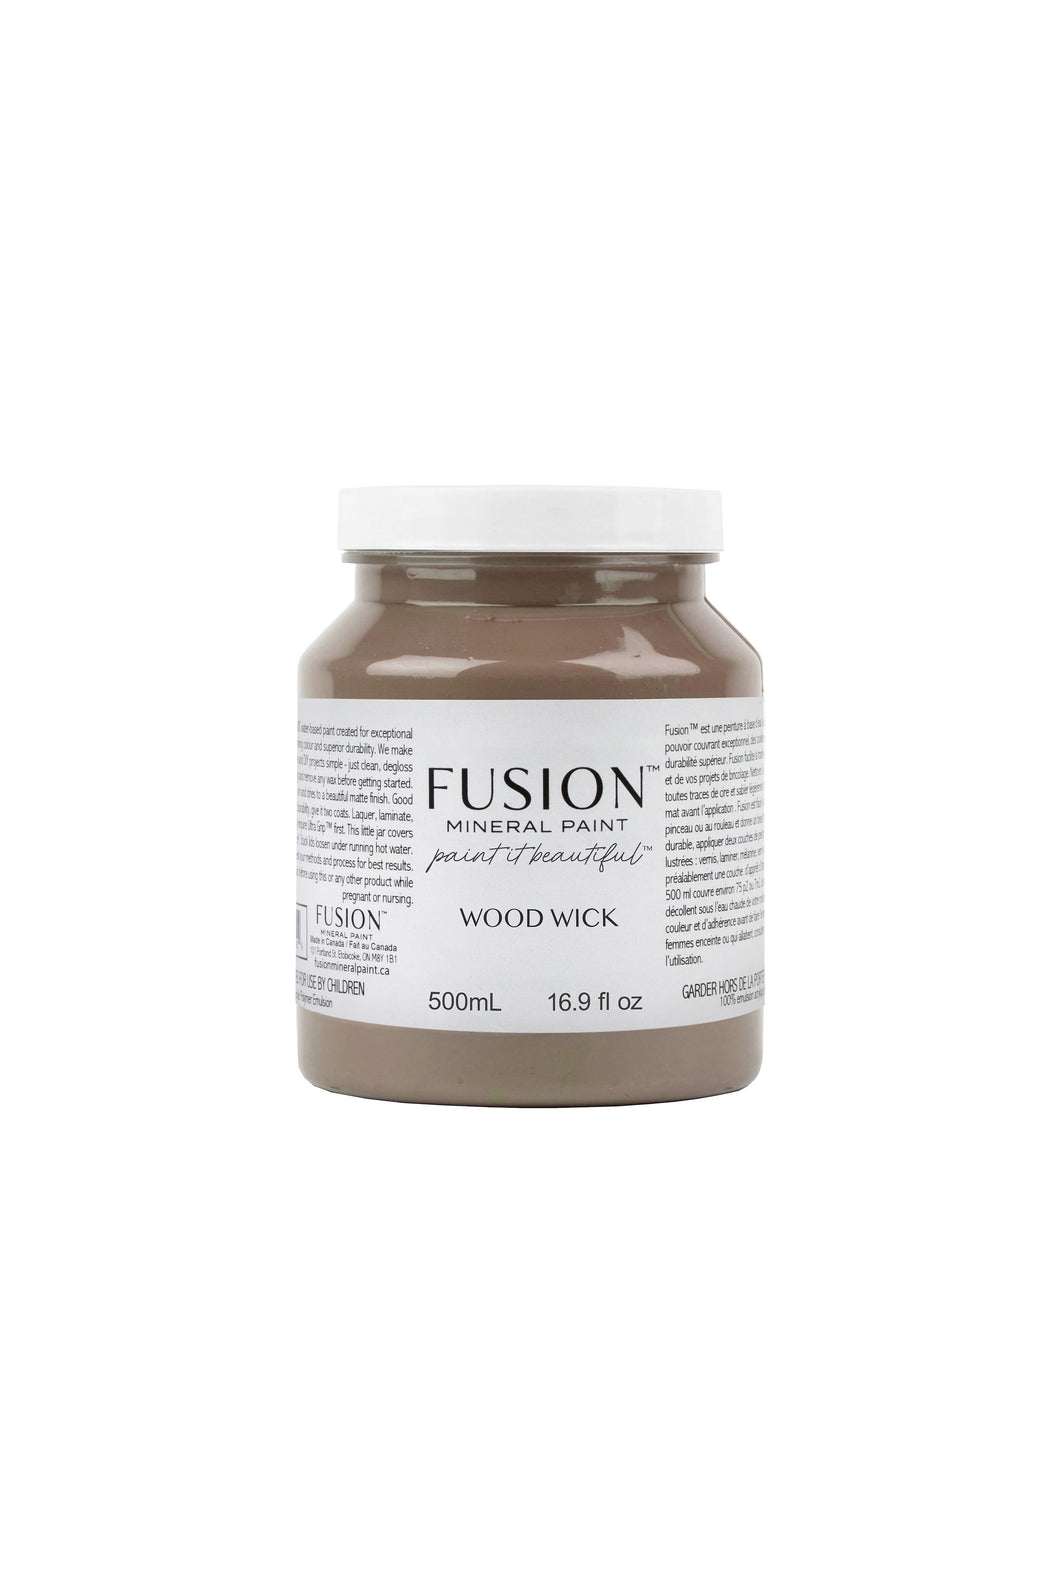 FUSION™ Mineral Paint - Woodwick 500ml